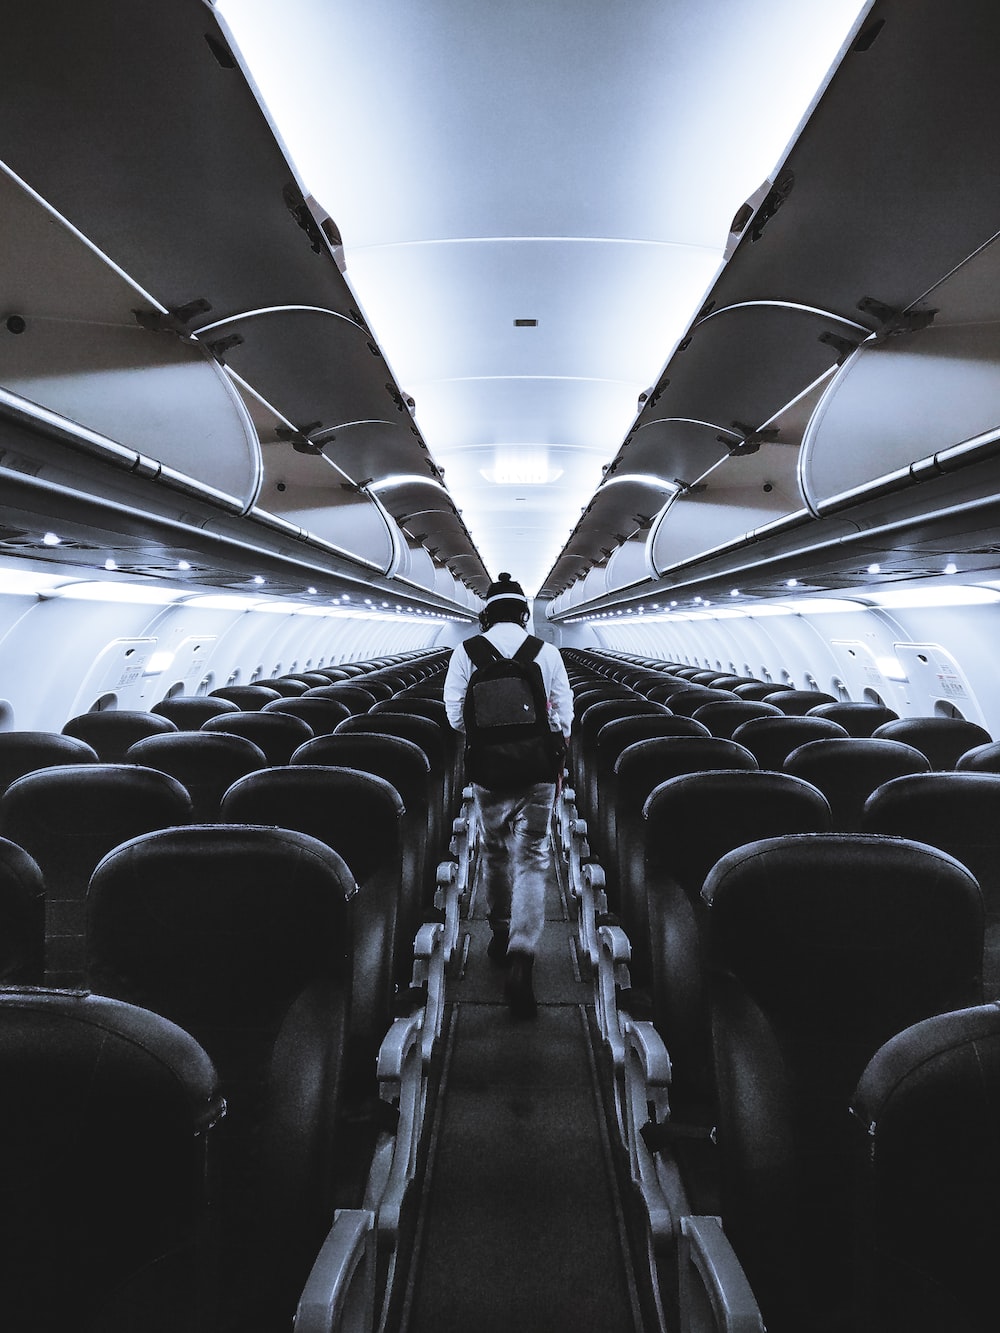 Inside Airplane Picture [HD]. Download Free Image